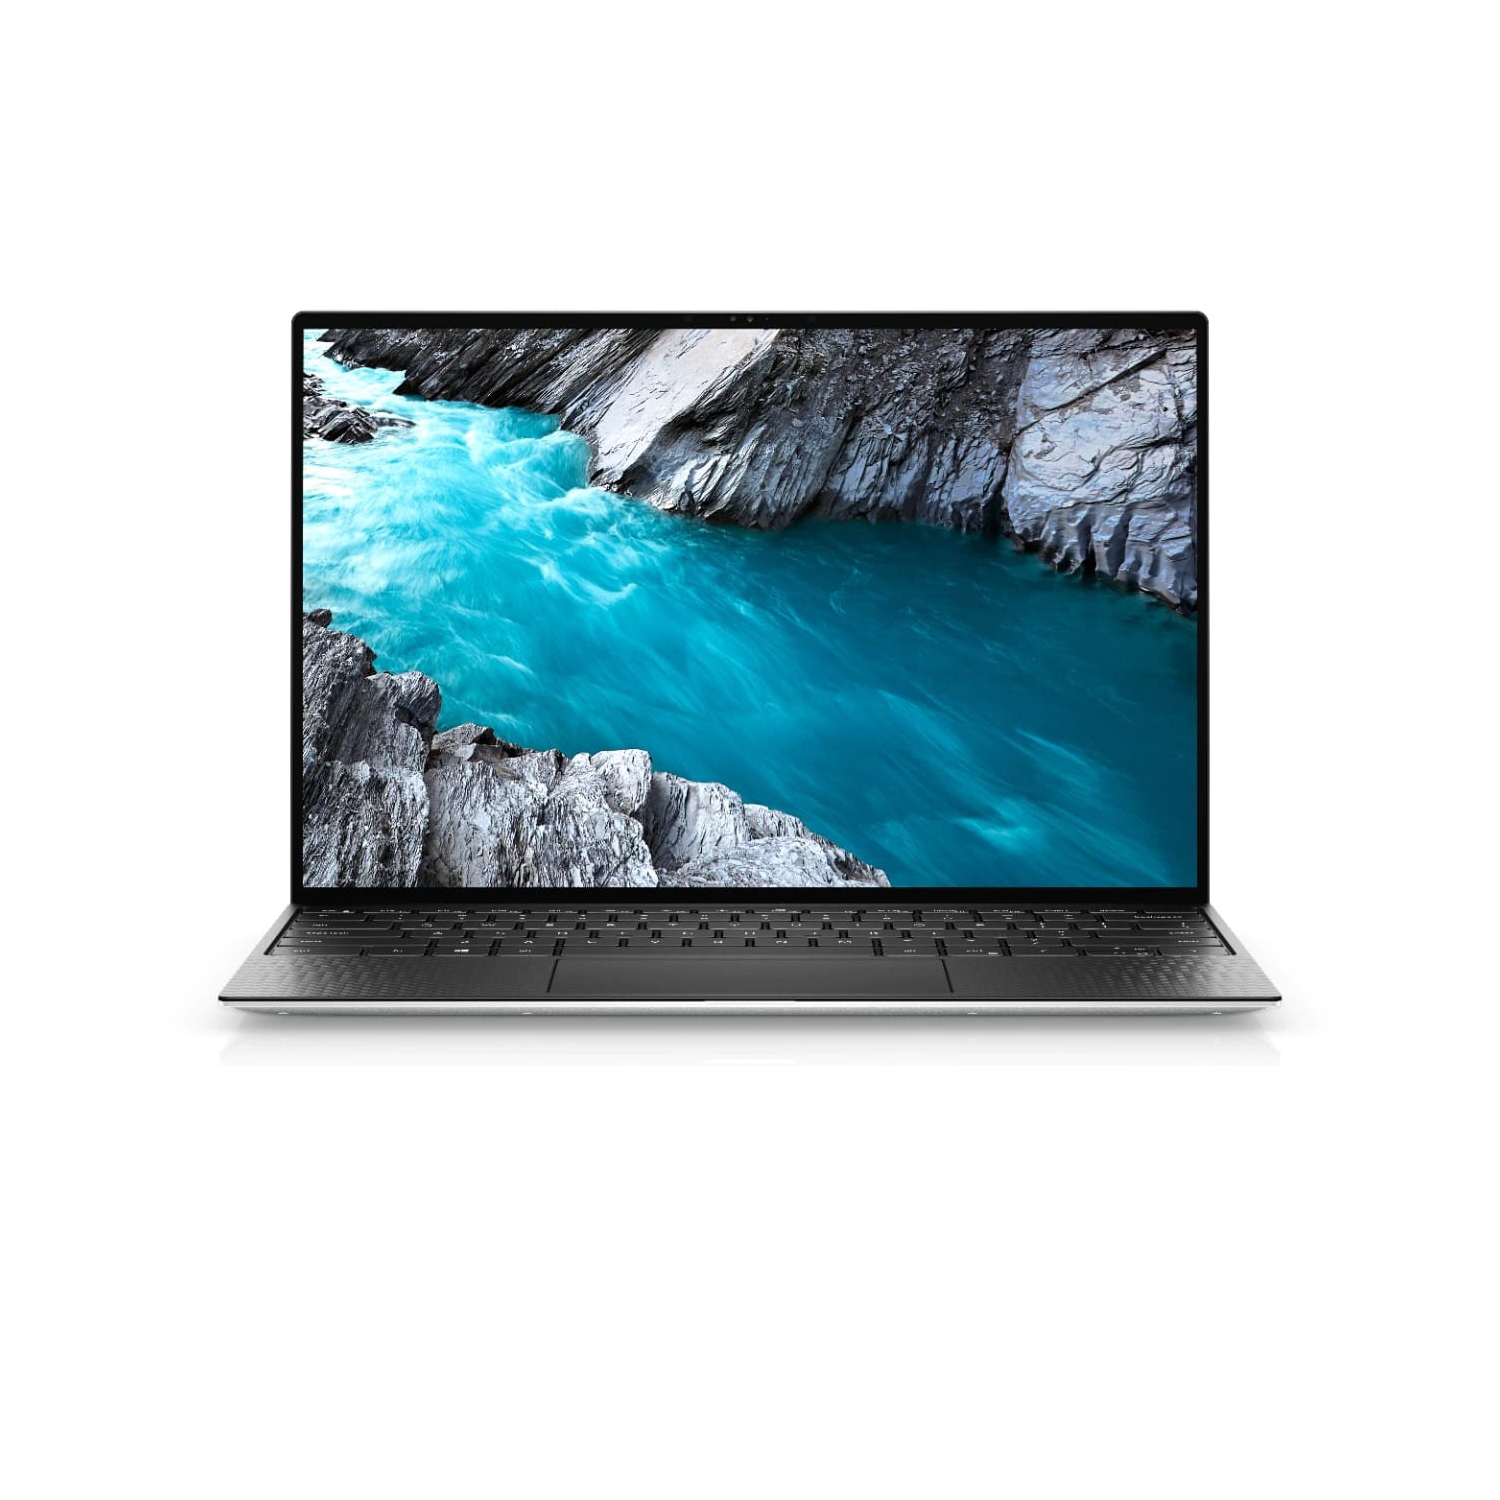 Refurbished (Excellent) - Dell XPS 13 9300 Laptop (2020) | 13.3" FHD+ Touch | Core i7 - 1TB SSD - 32GB RAM | 4 Cores @ 3.9 GHz - 10th Gen CPU Certified Refurbished